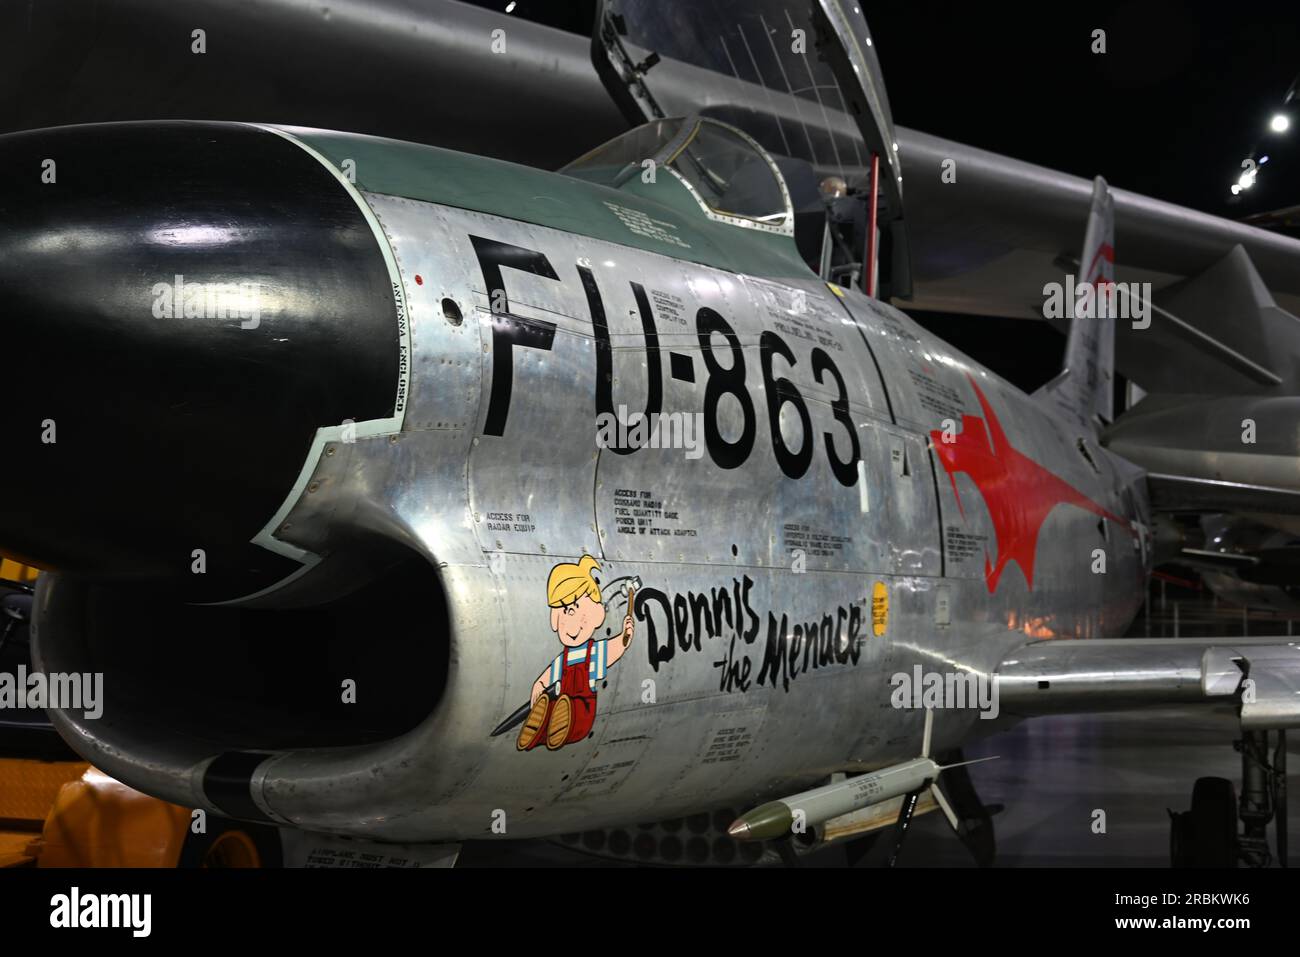 A USAF F-86D Sabre attack aircraft used in the first Iraq war on display at the US Air Force National Museum in Dayton, Ohio. Stock Photo